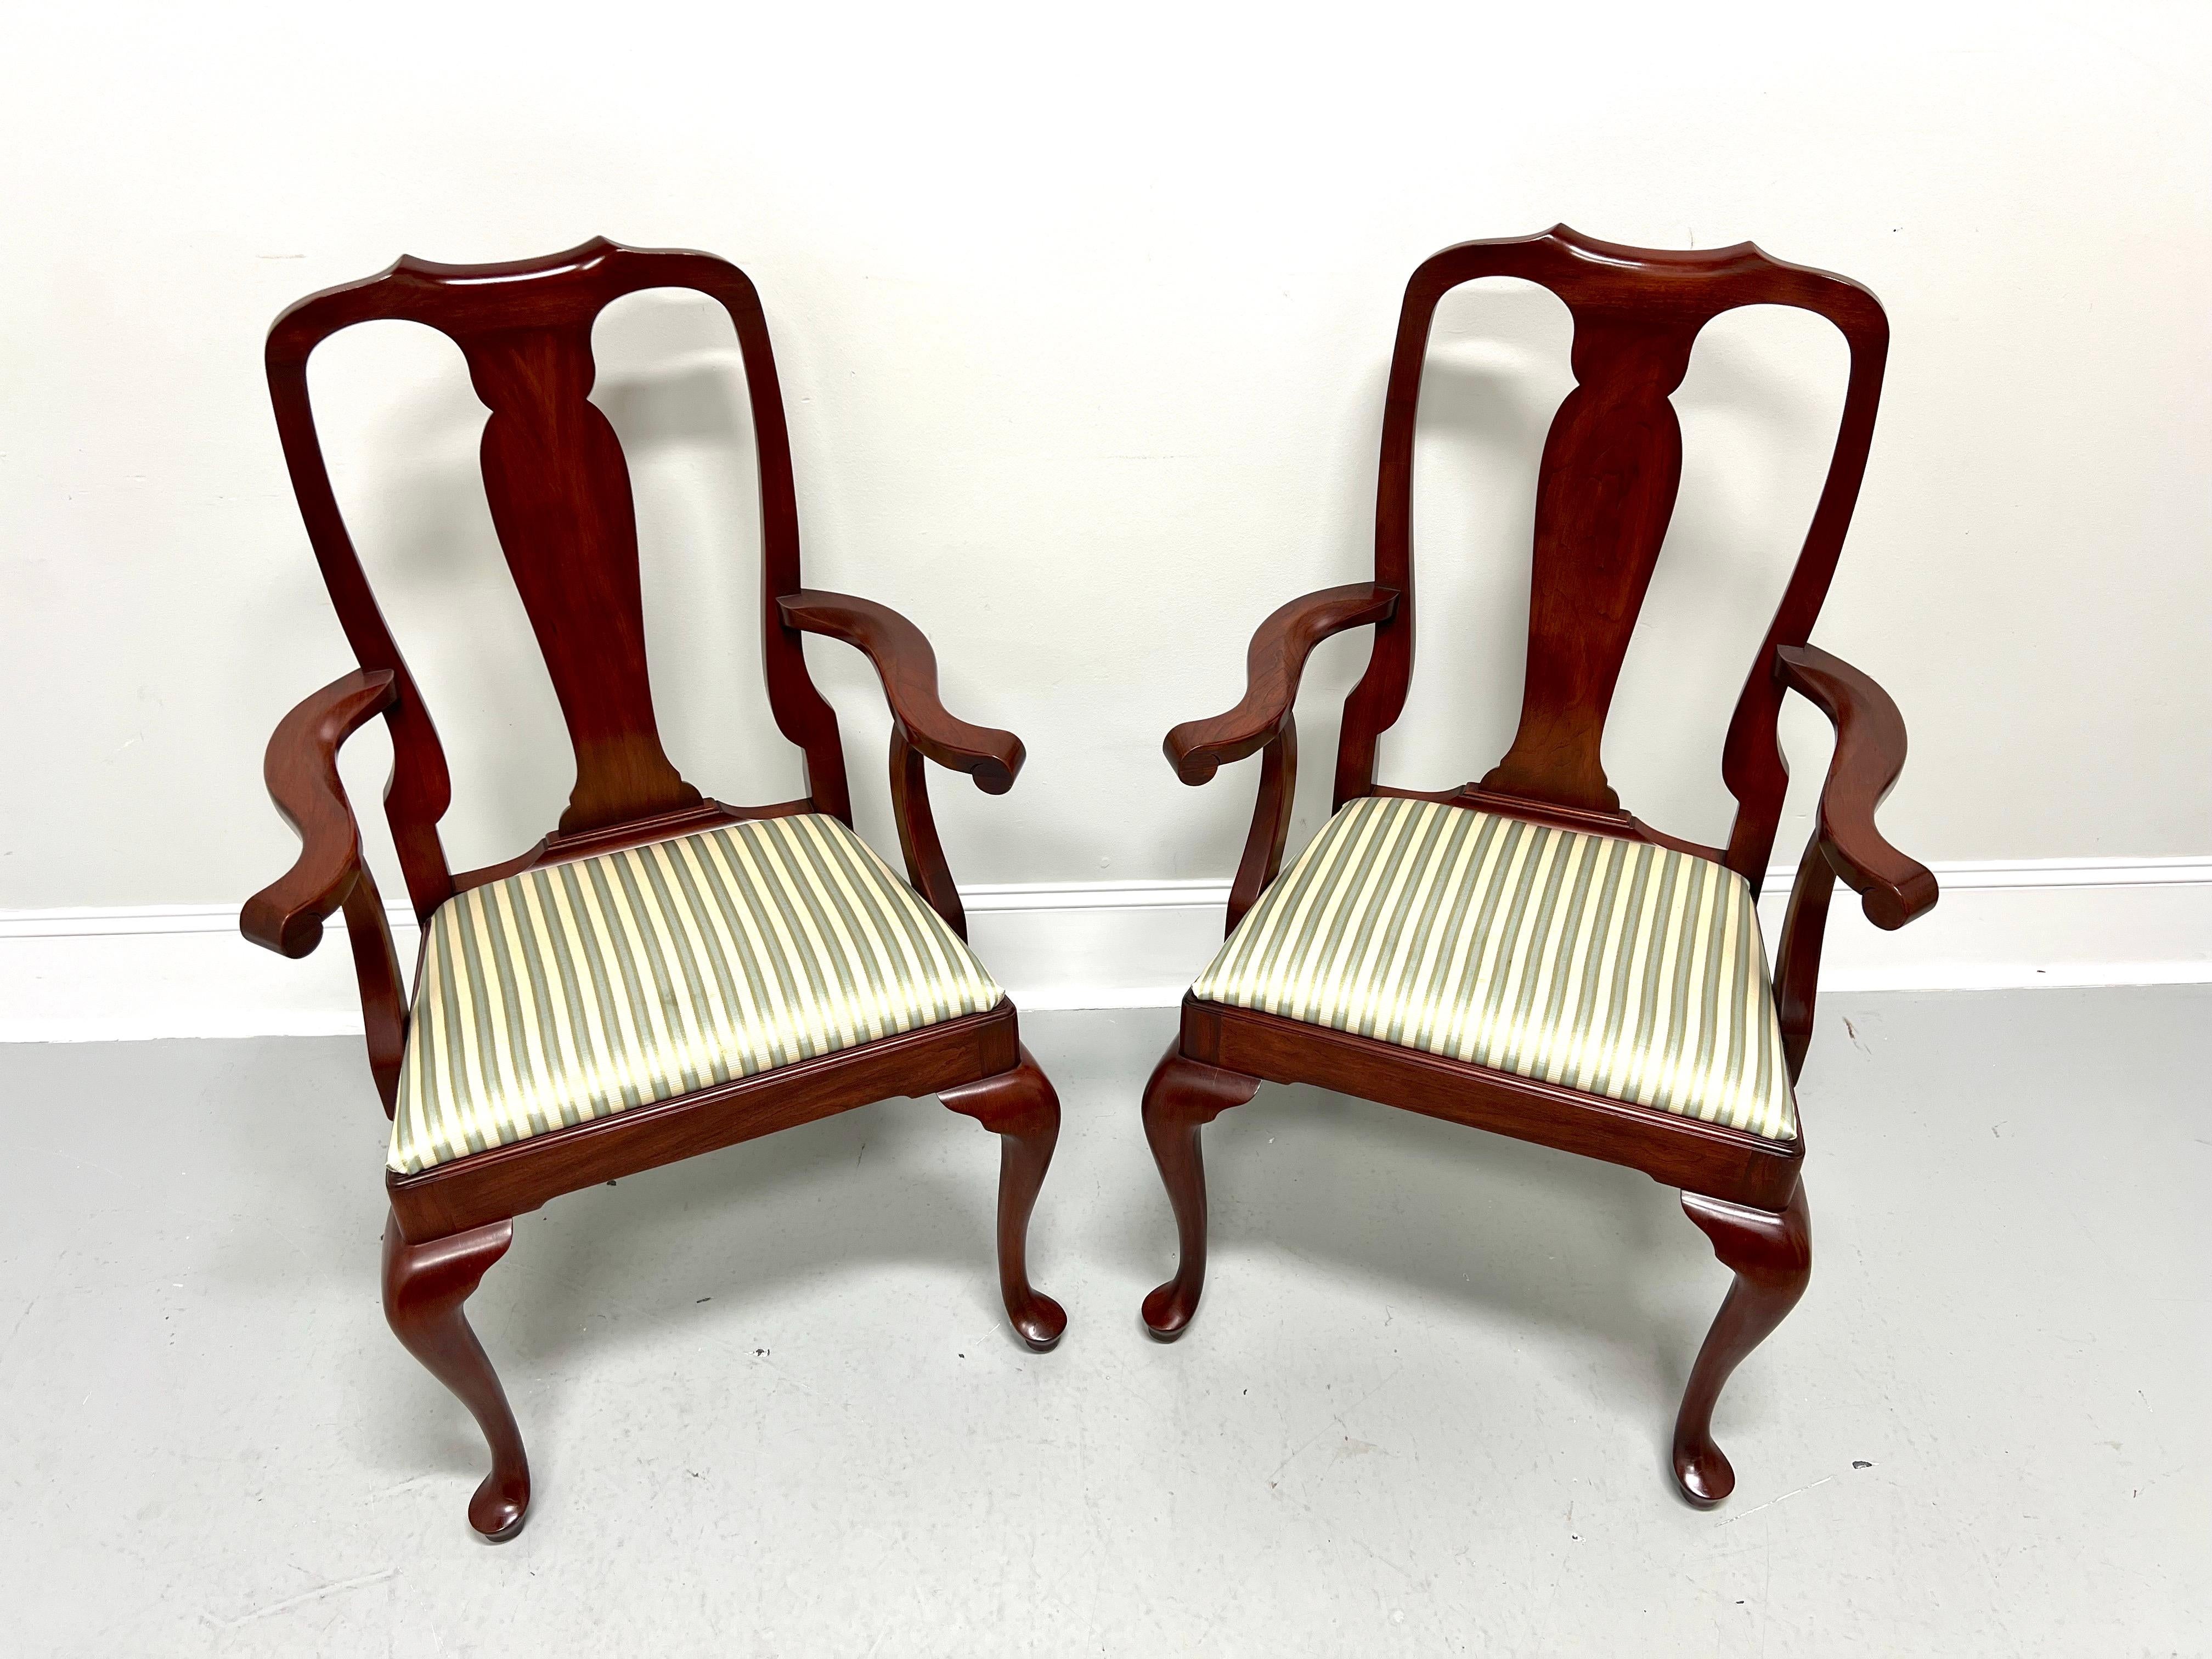 A pair of Queen Anne style dining armchairs by Henkel Harris, of Winchester, Virginia, USA. Solid wild black cherry wood, carved center backrest, carved curved arms with curved supports, upholstered seat in a multi-color stripe patterned fabric,